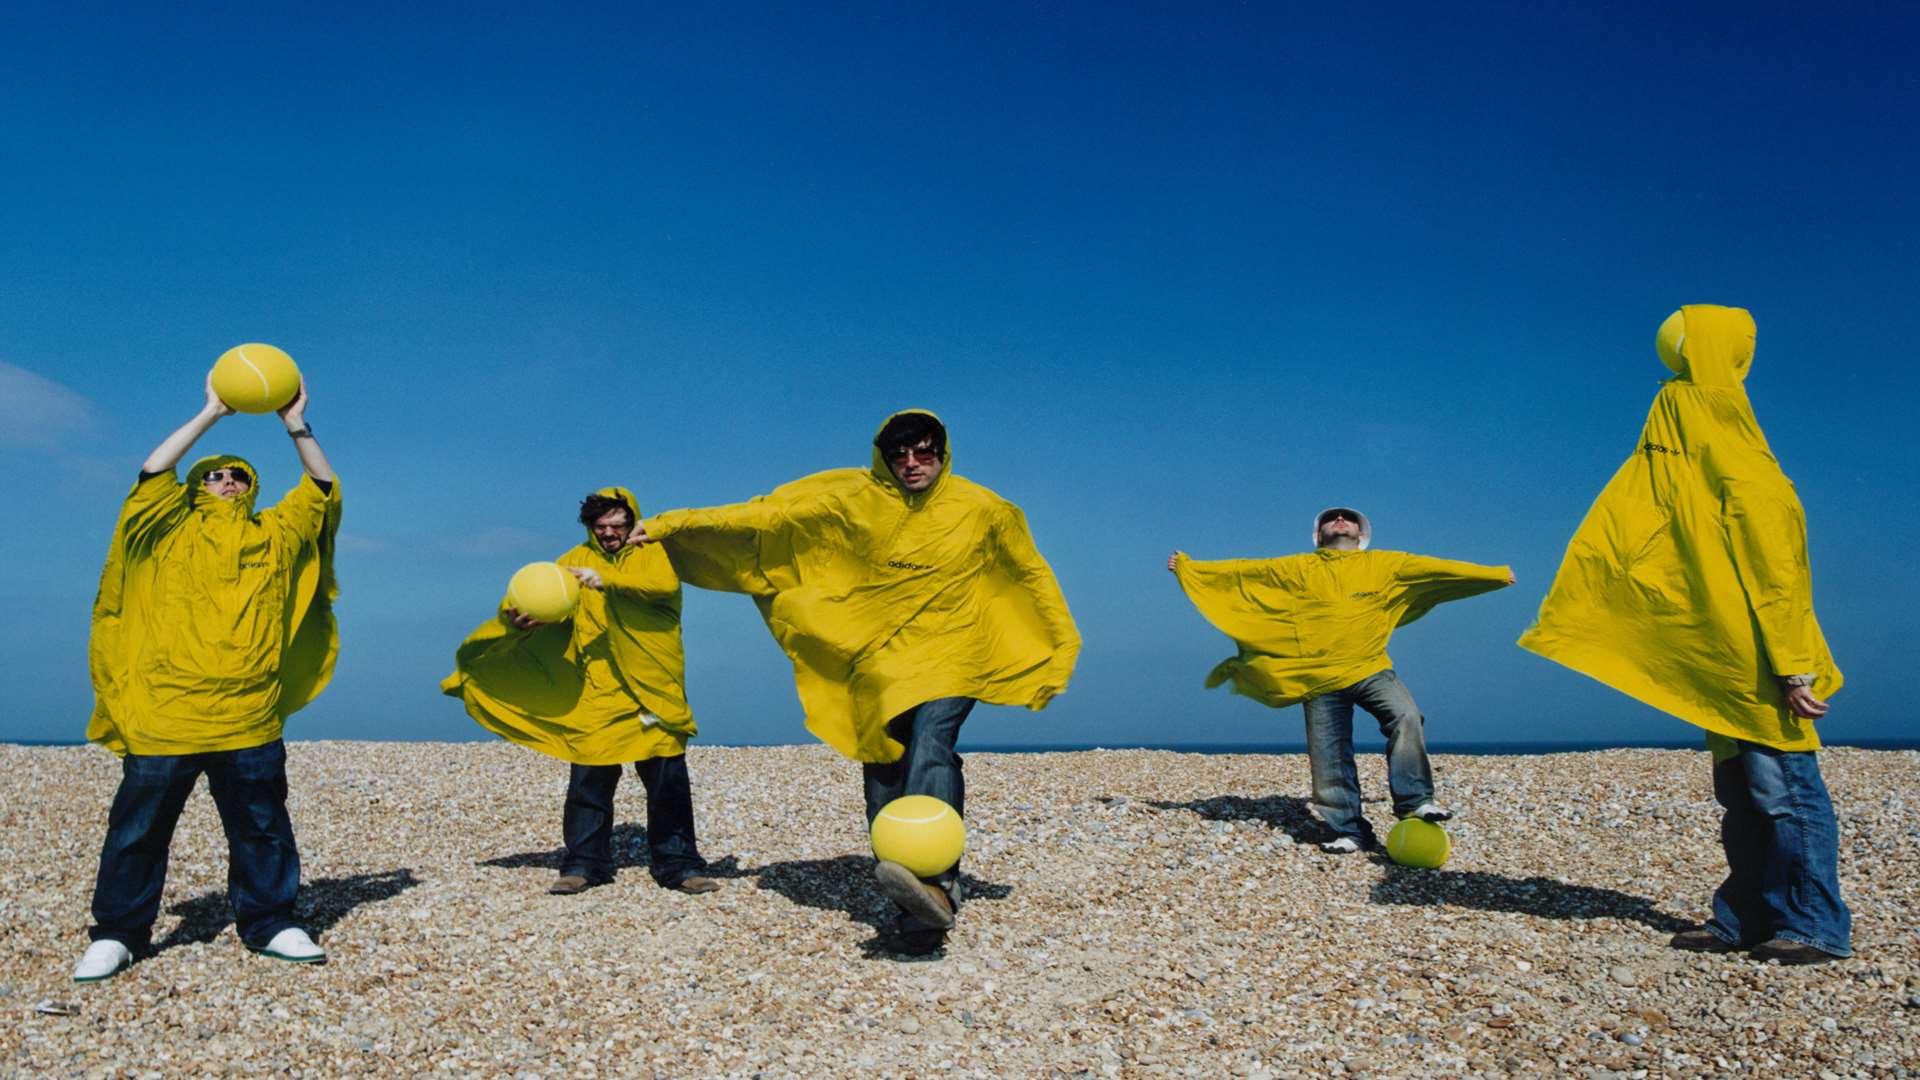 Super Furry Animals will be taking part at Forgotten Fields